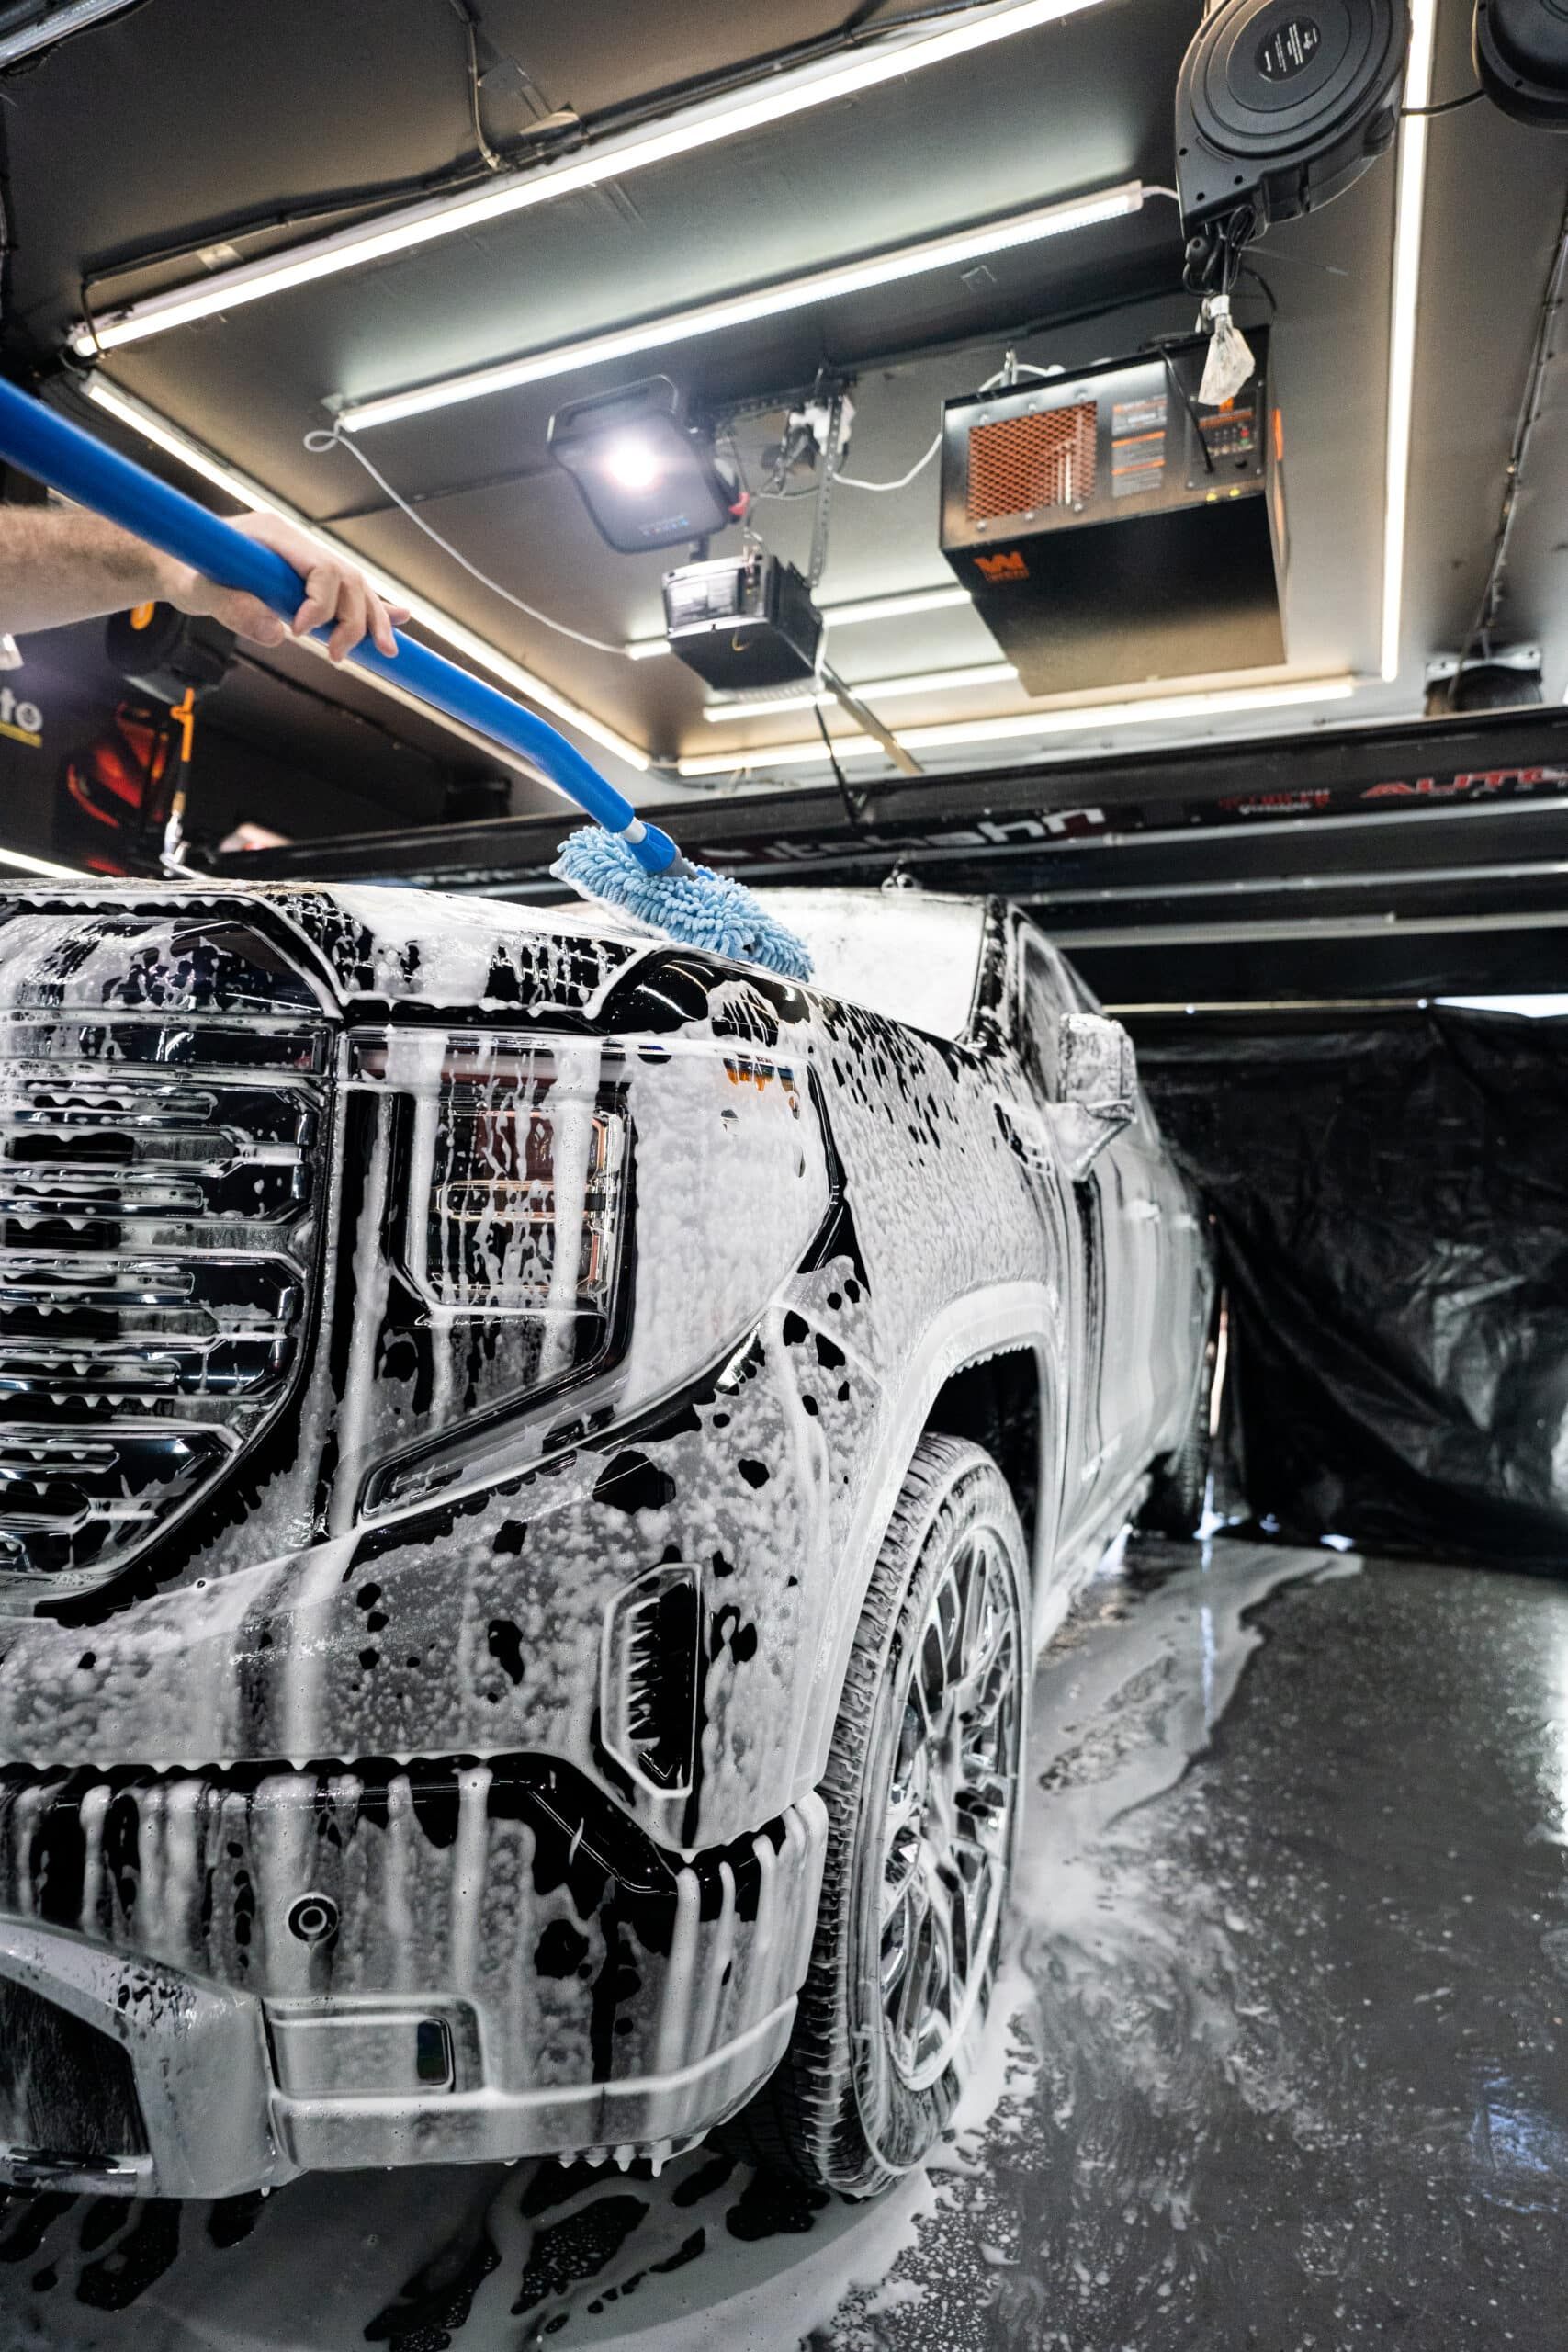 A car is covered in foam and being washed in a garage.